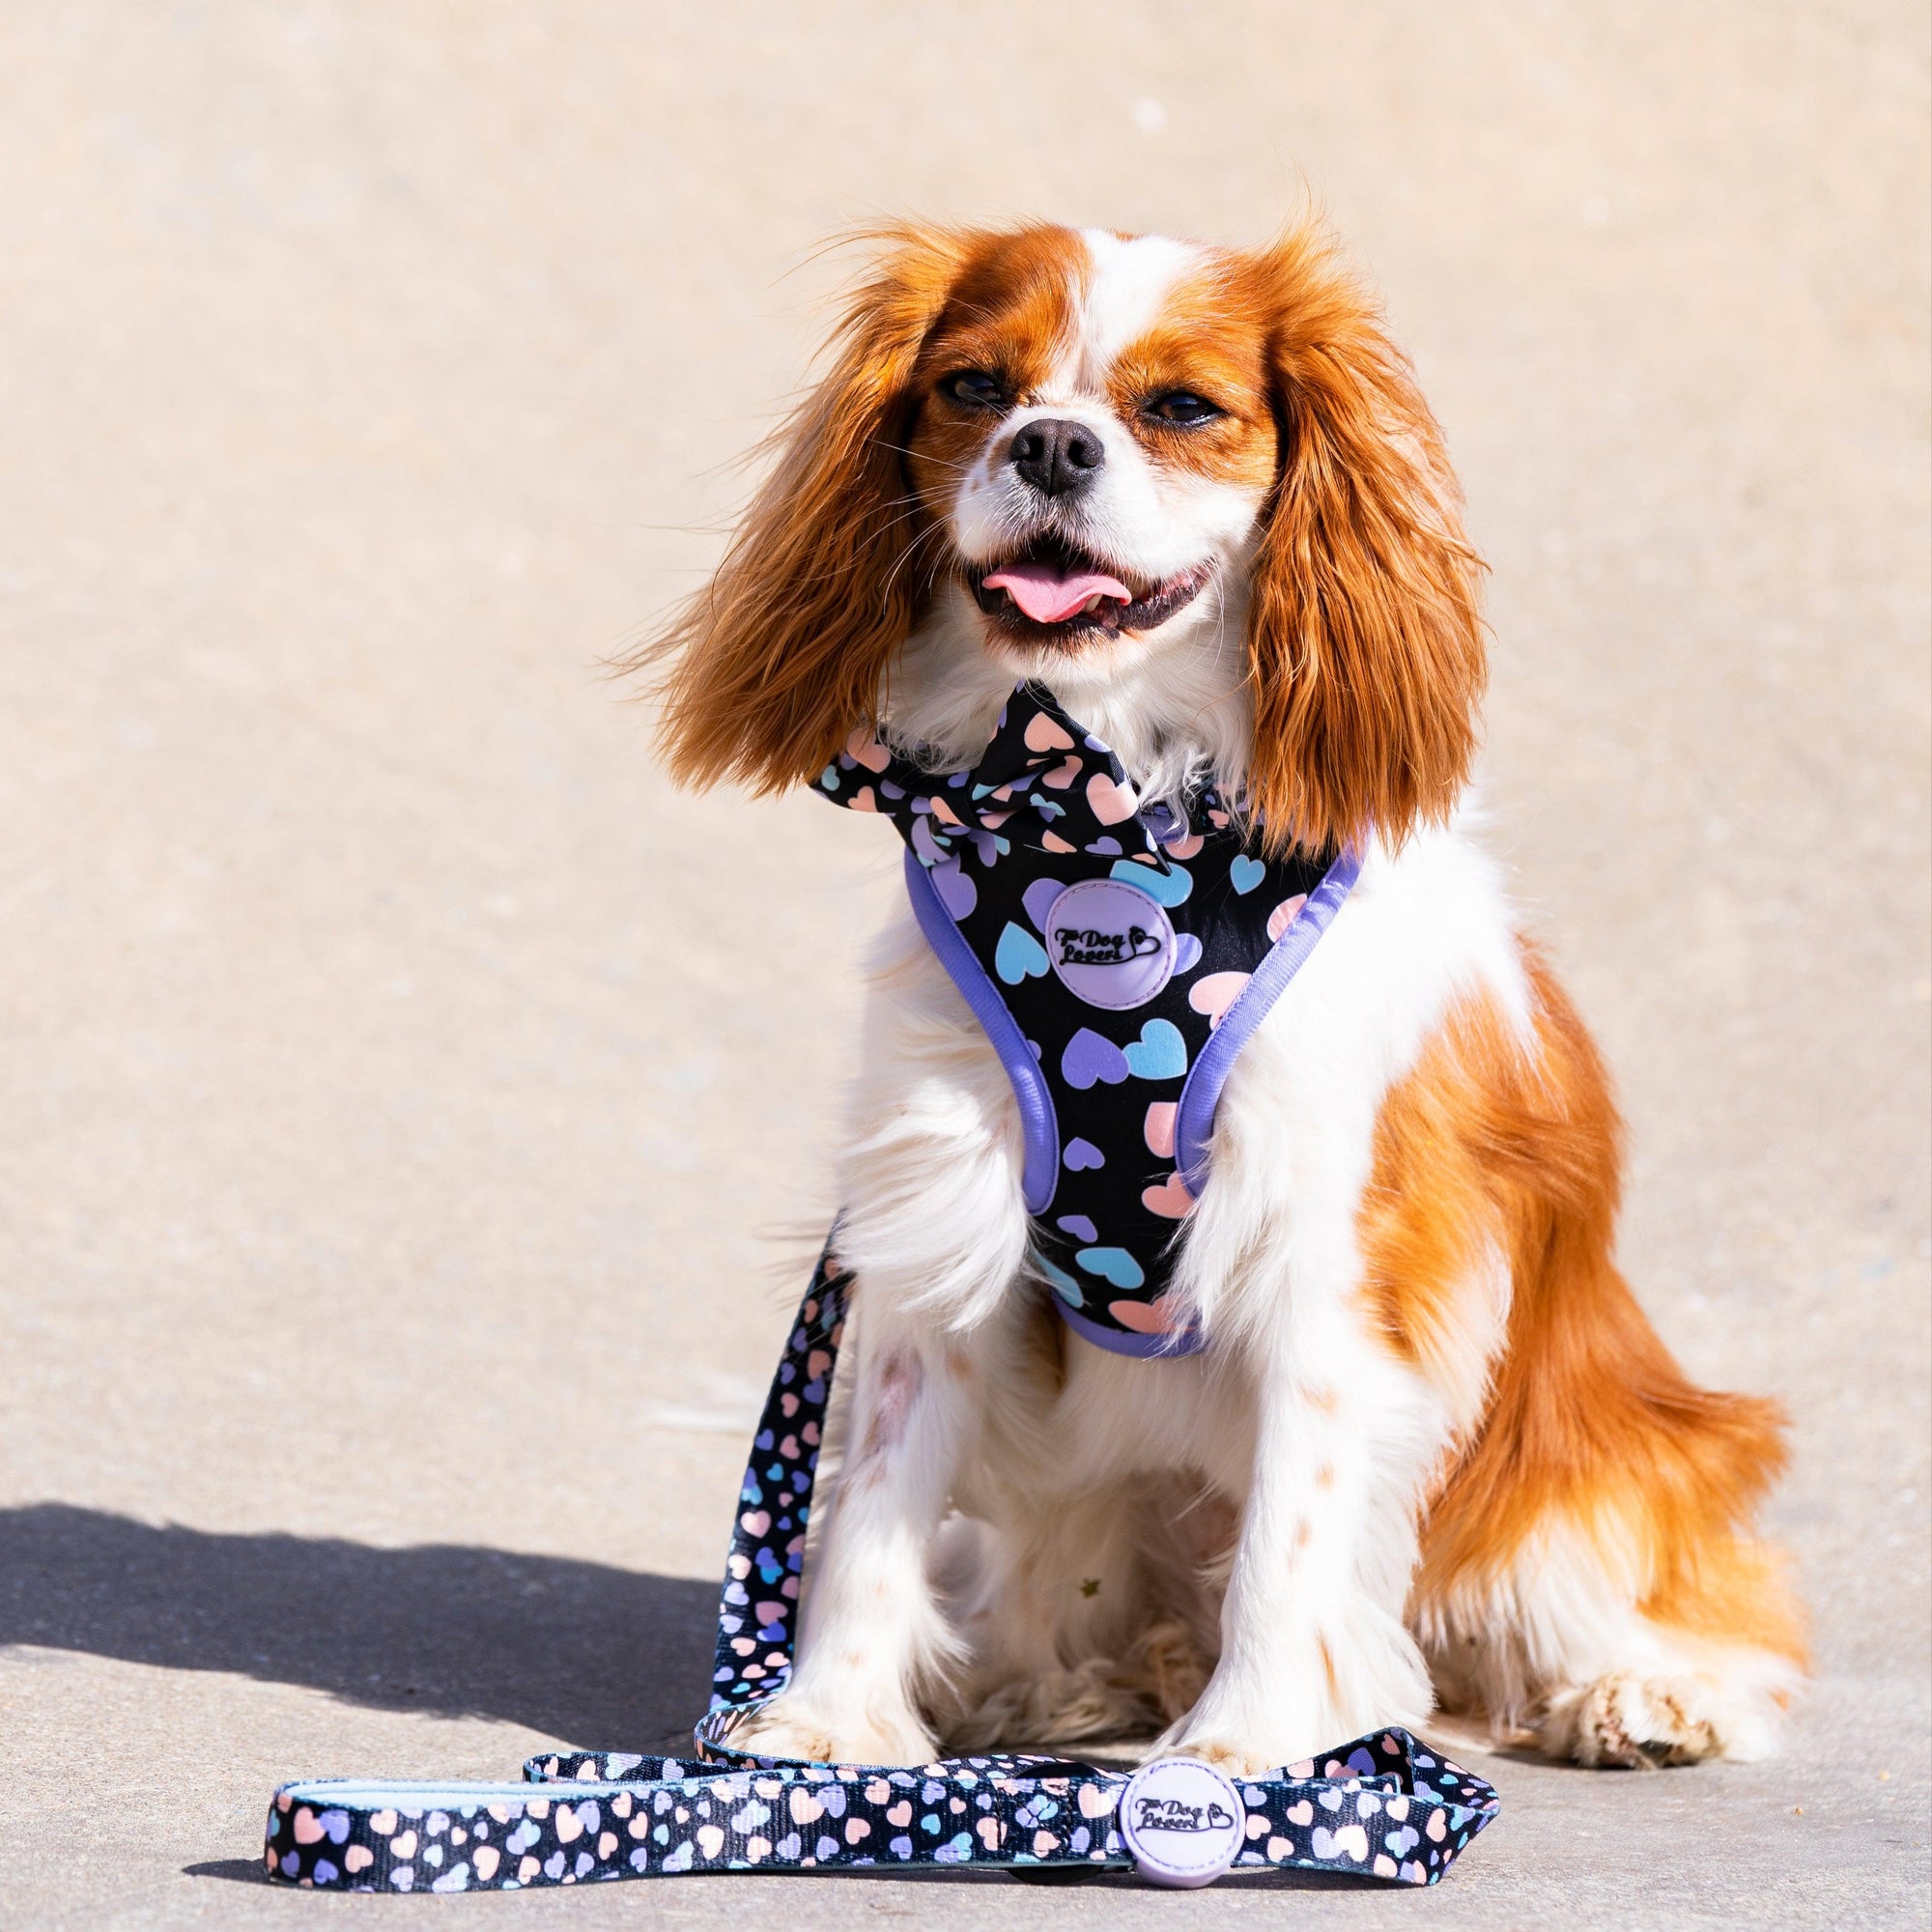 Adjustable Dog Harness - All You Need Is Love